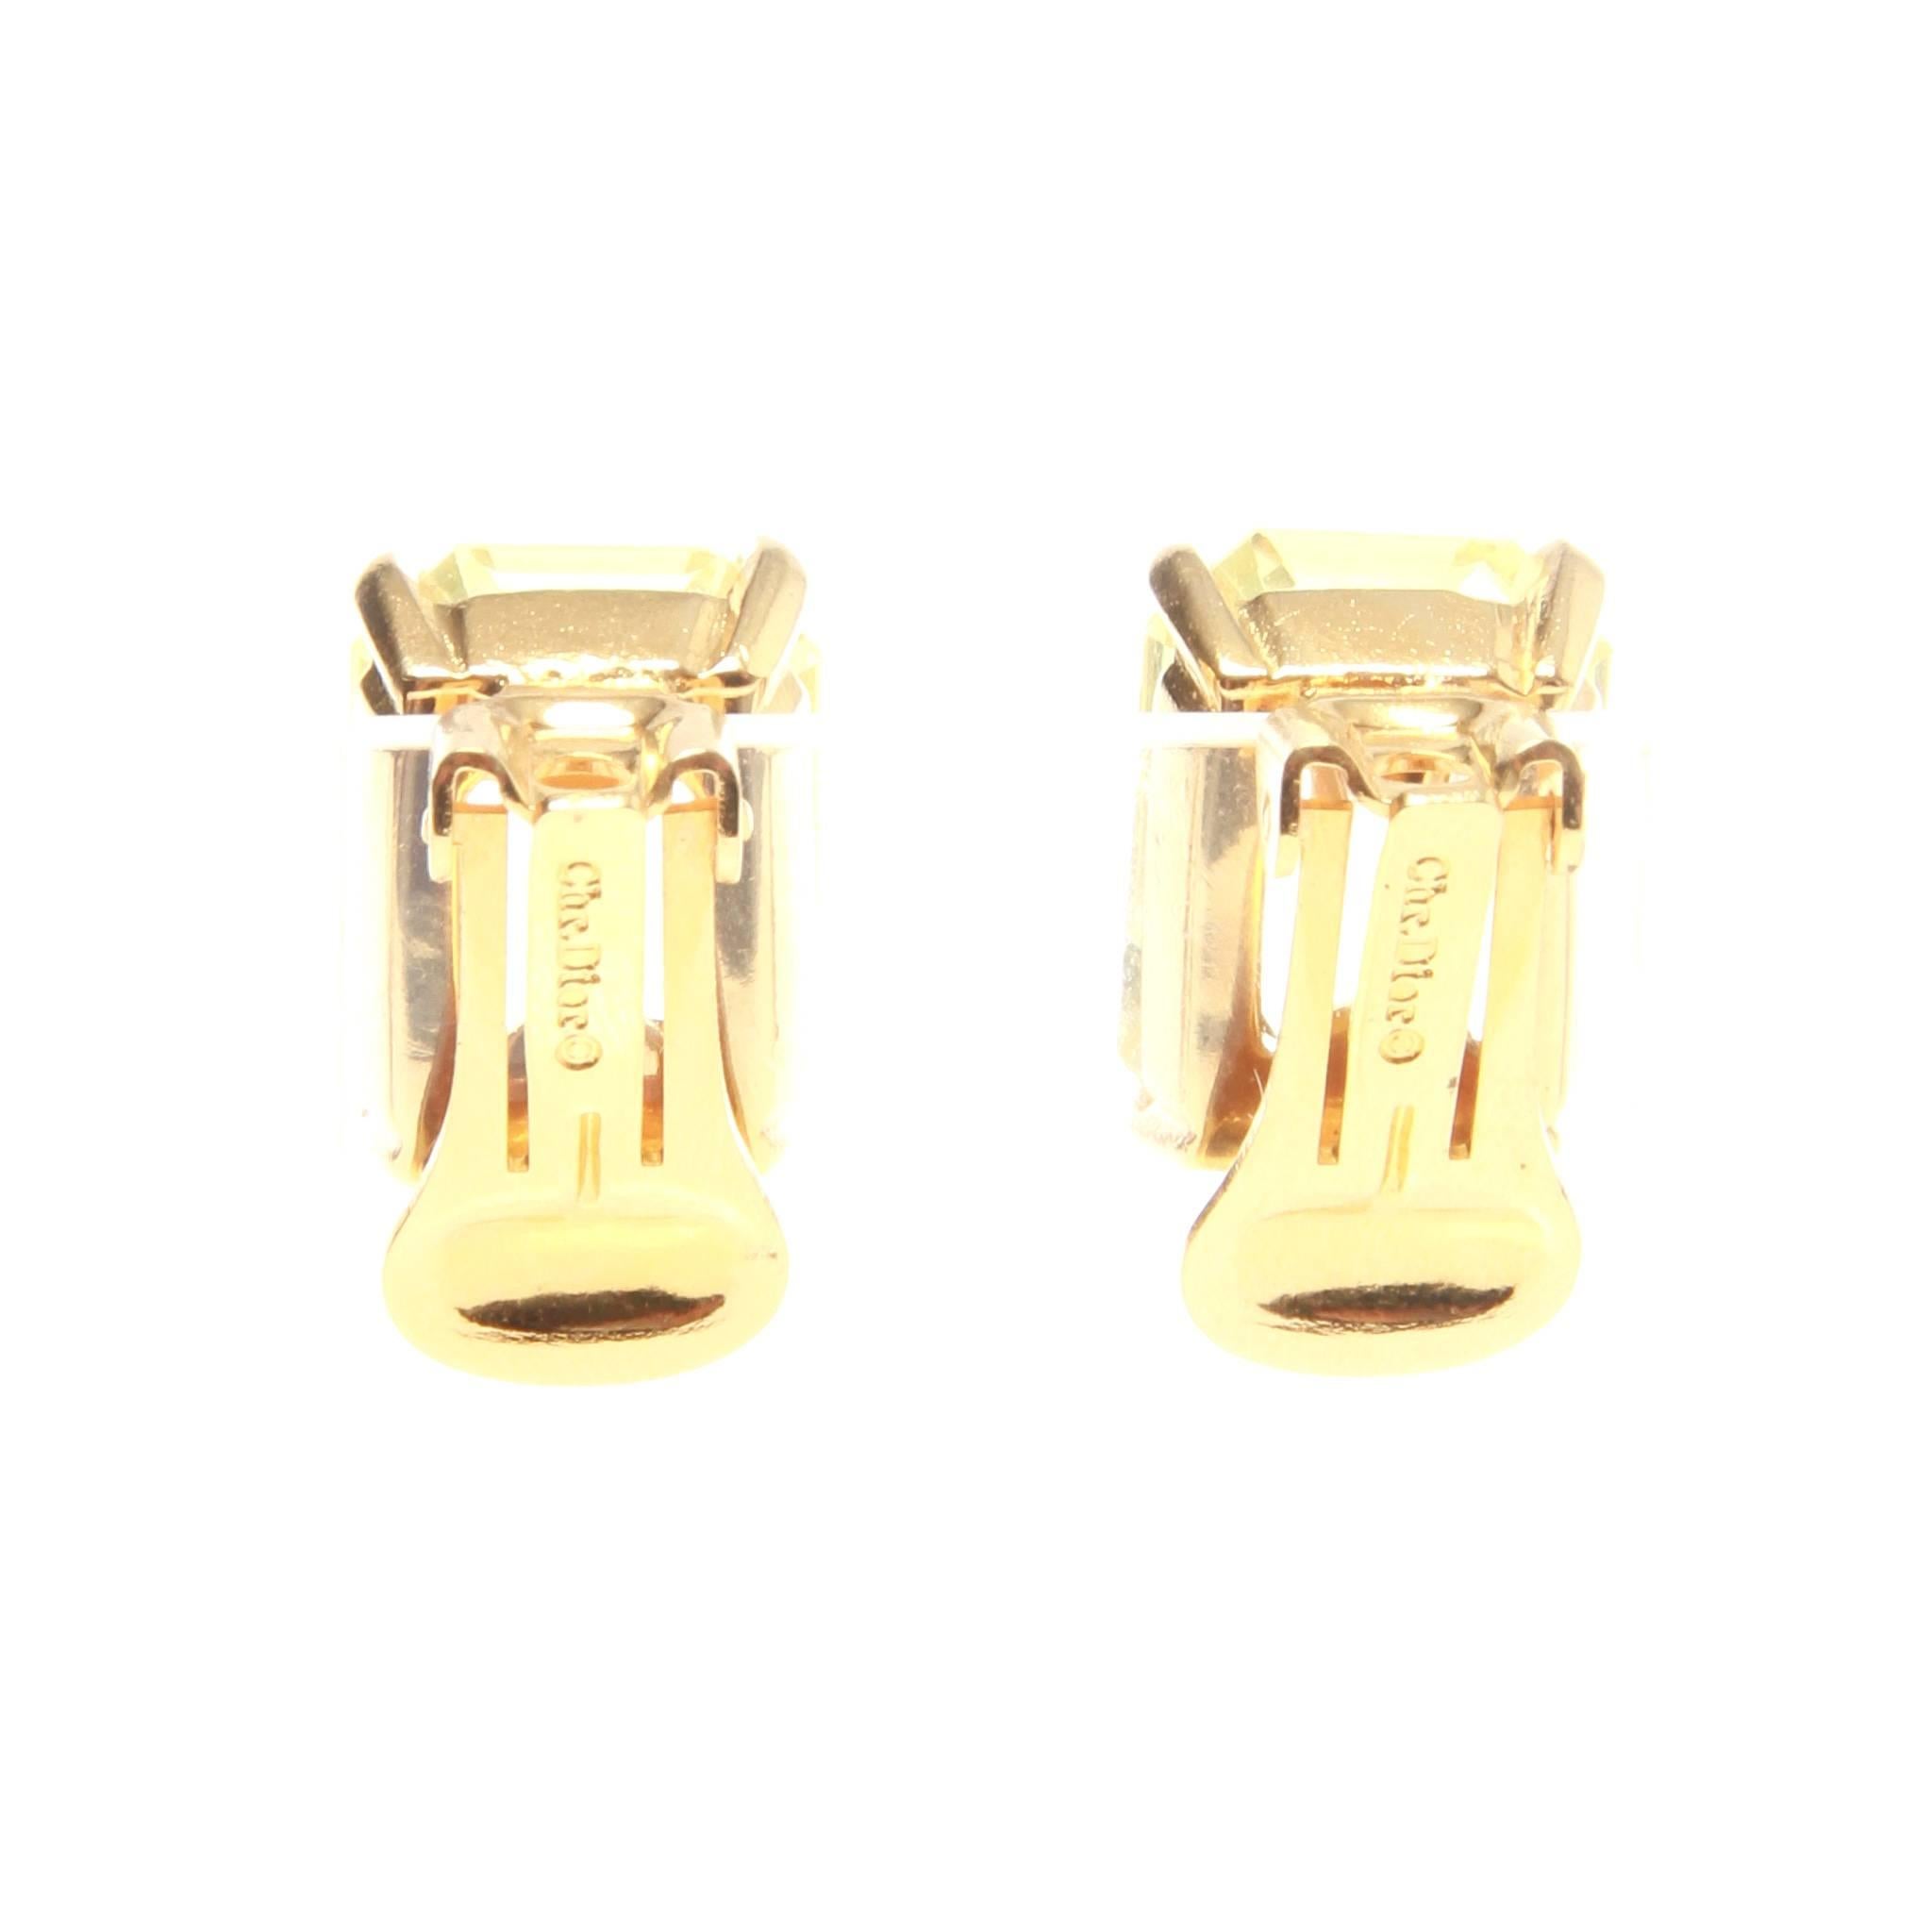 Christian Dior vintage clip on earrings featuring a lemon toned rectangular stone and gold-tone hardware. Engraved 'Chr Dior' at back.